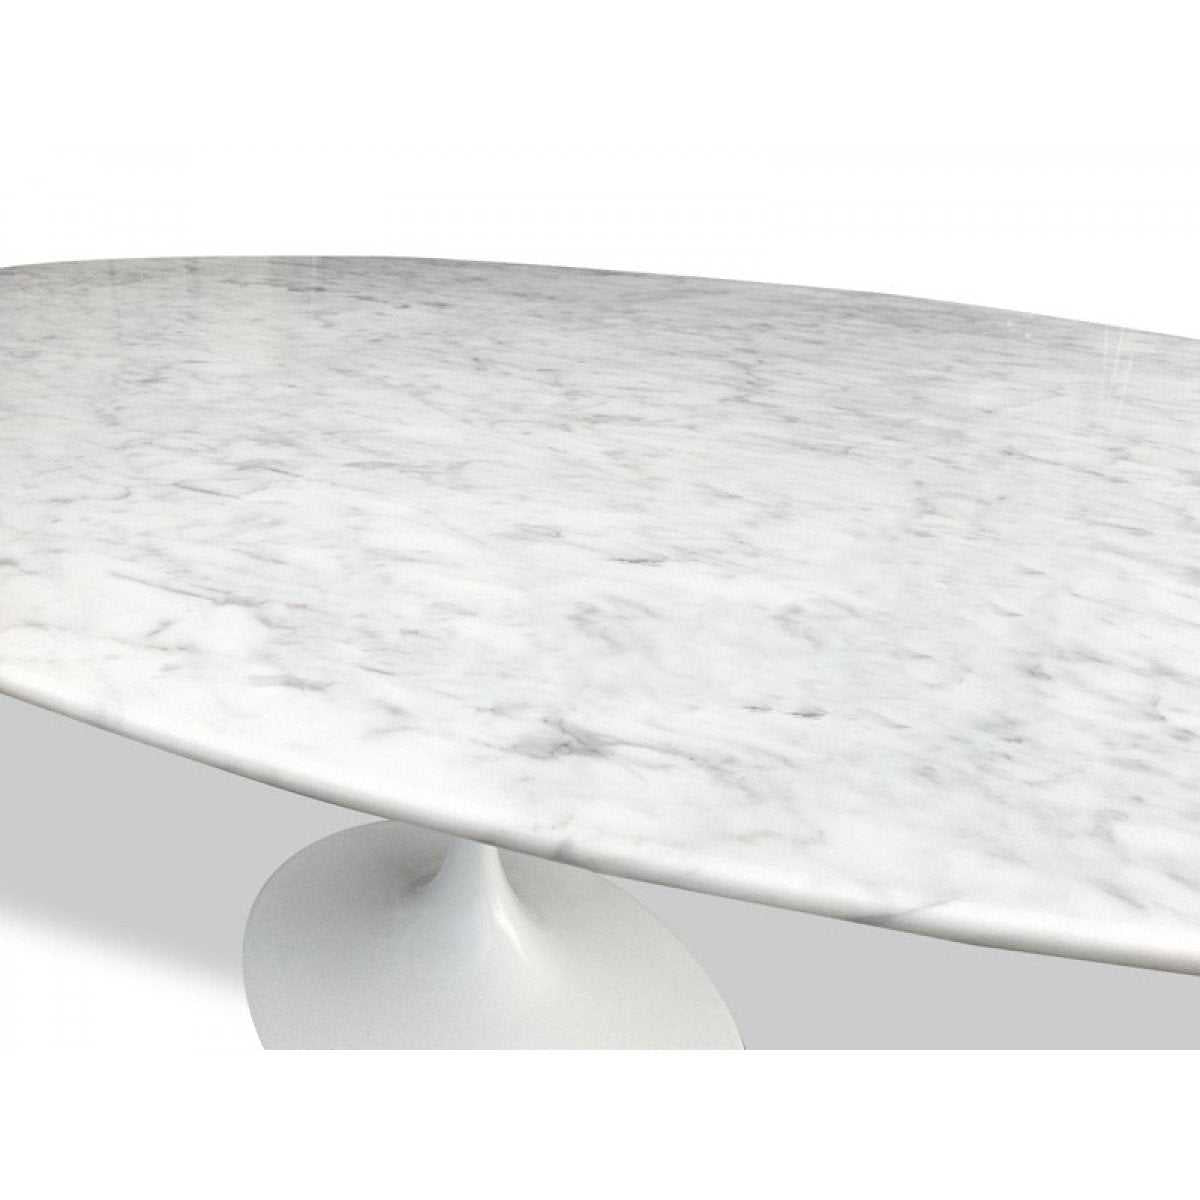 Oval 2m Marble Dining Table